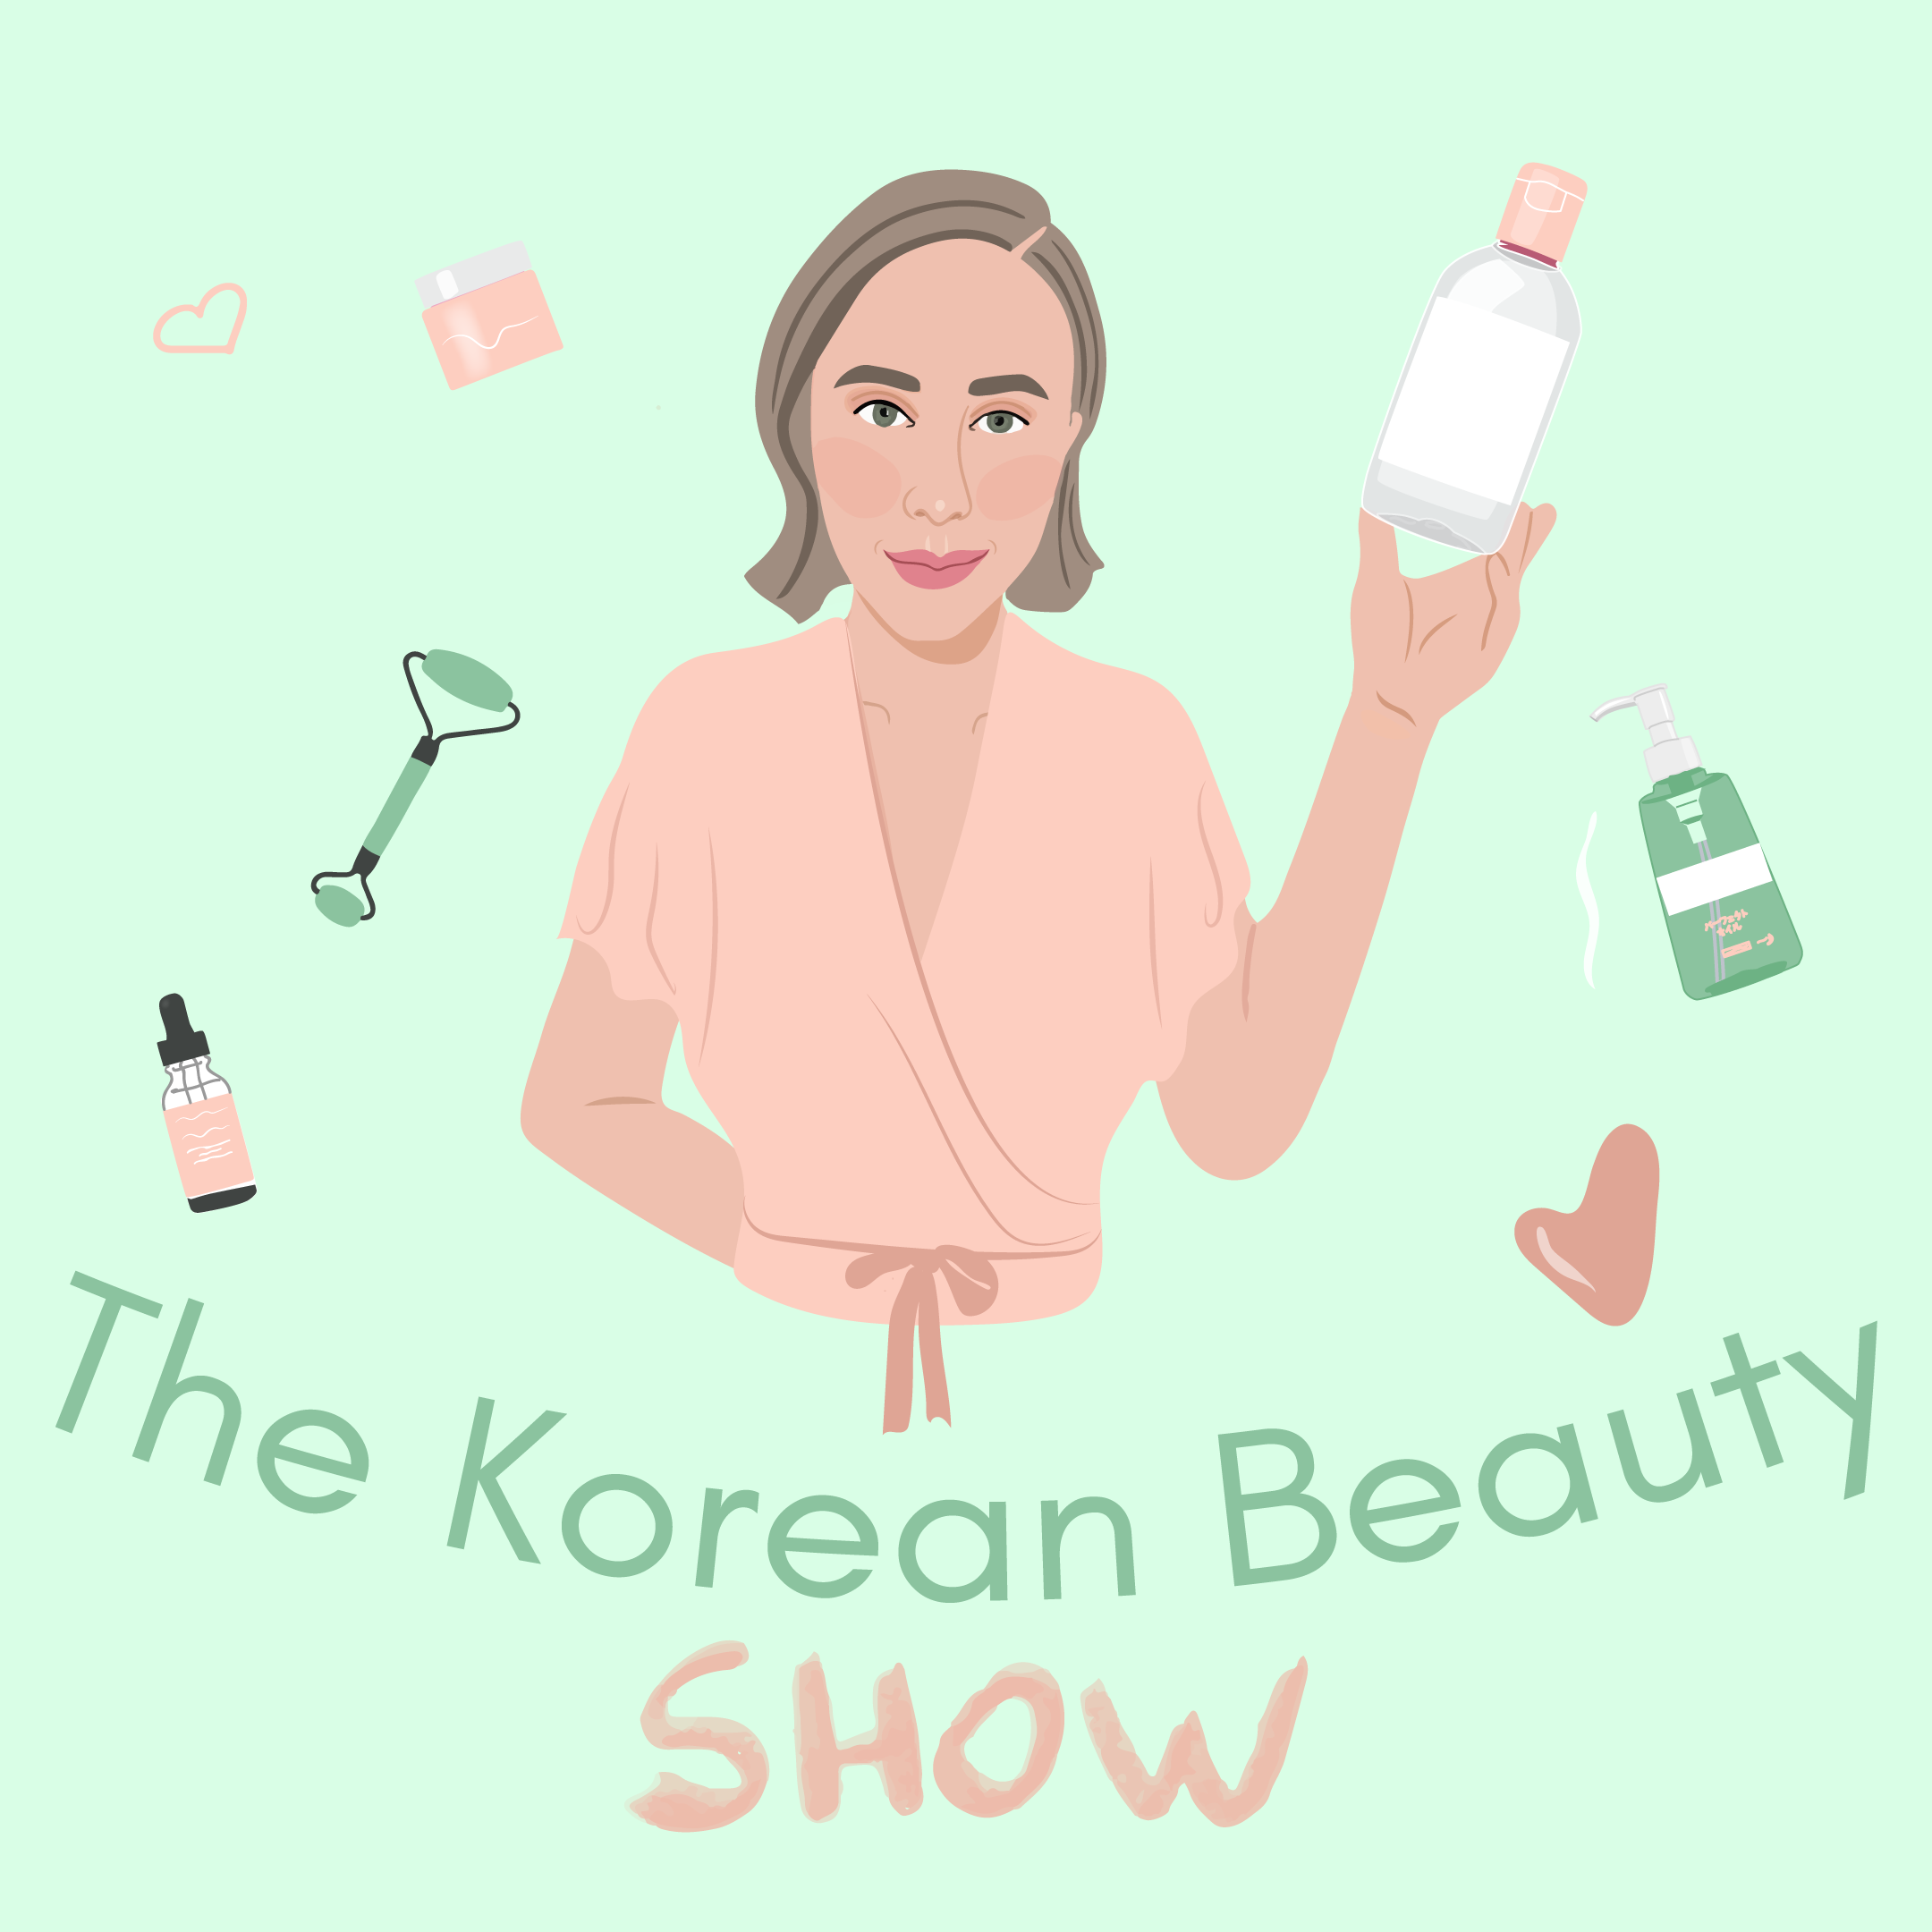 A Korean Sunscreen Scandal of a Different Kind